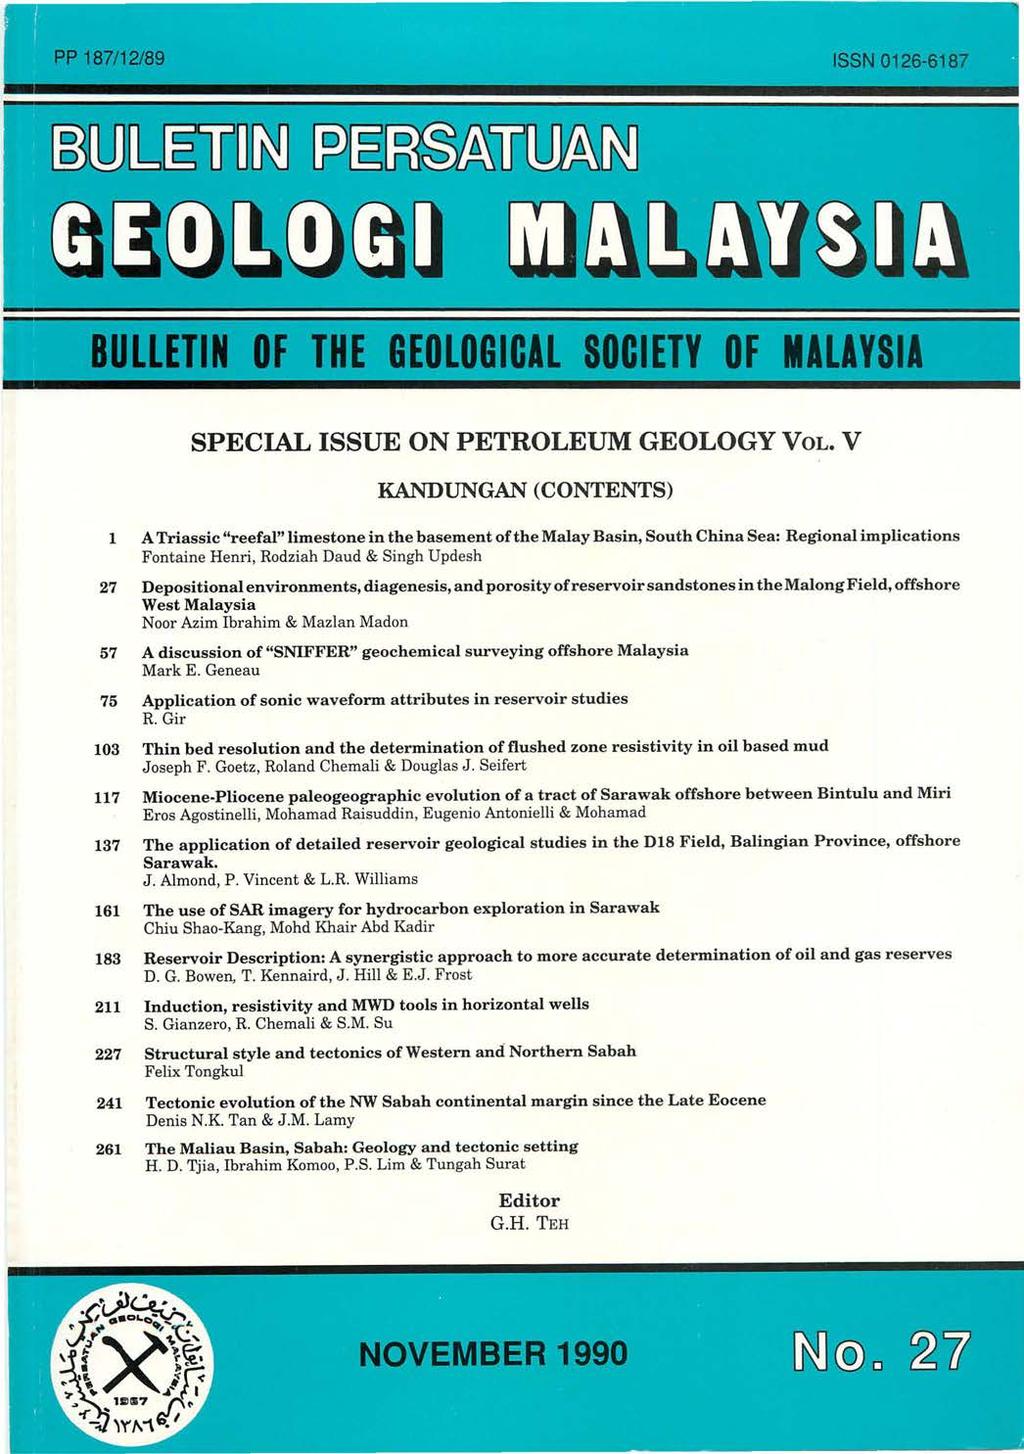 SPECIAL ISSUE ON PETROLEUM GEOLOGY VOL.